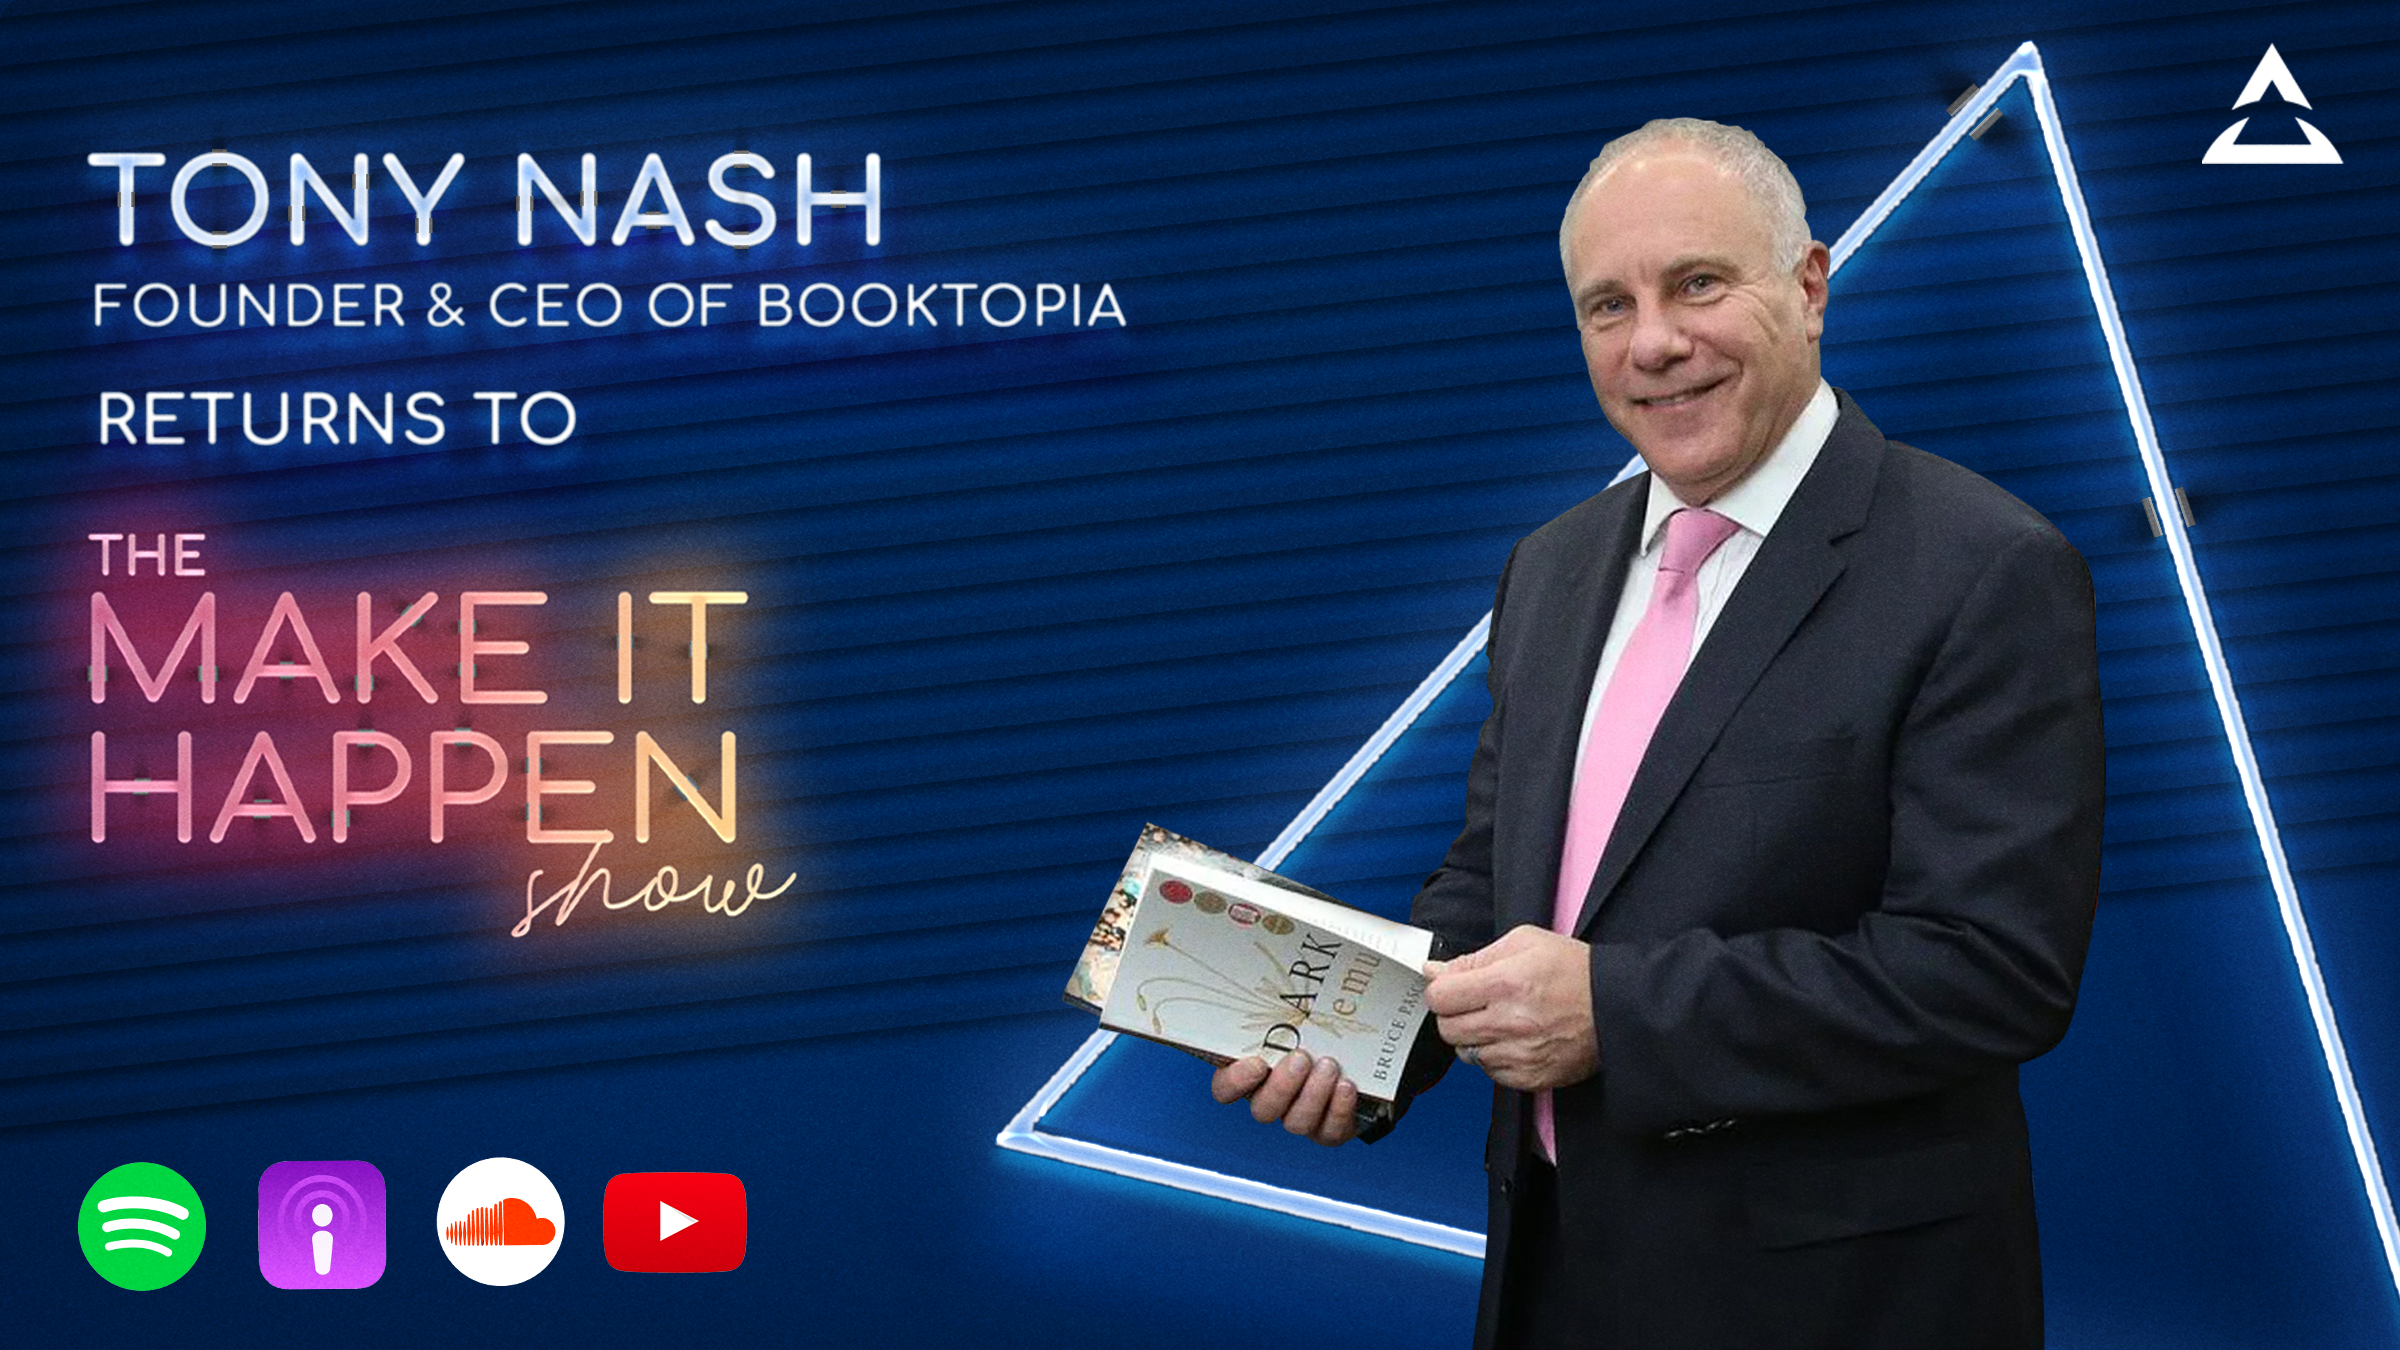 Tony Nash, Founder and CEO of Booktopia returns to The Make It Happen Show